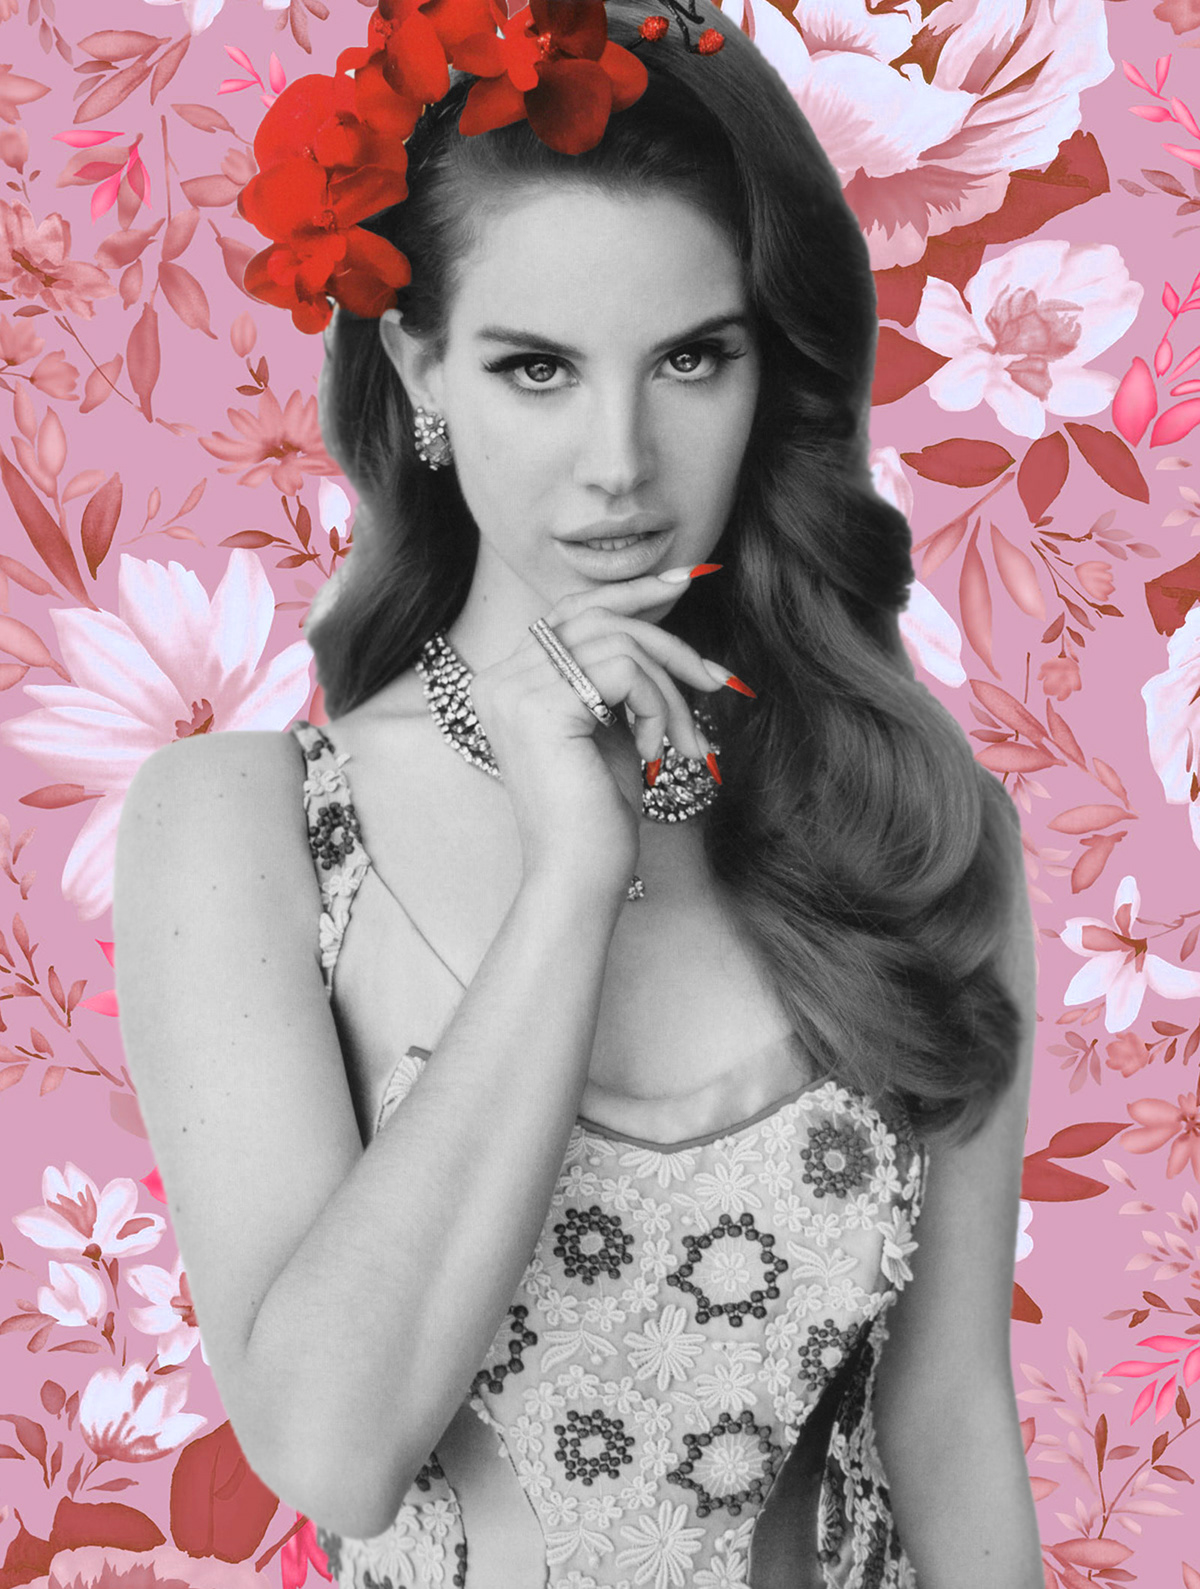 Lana Del Rey colored red